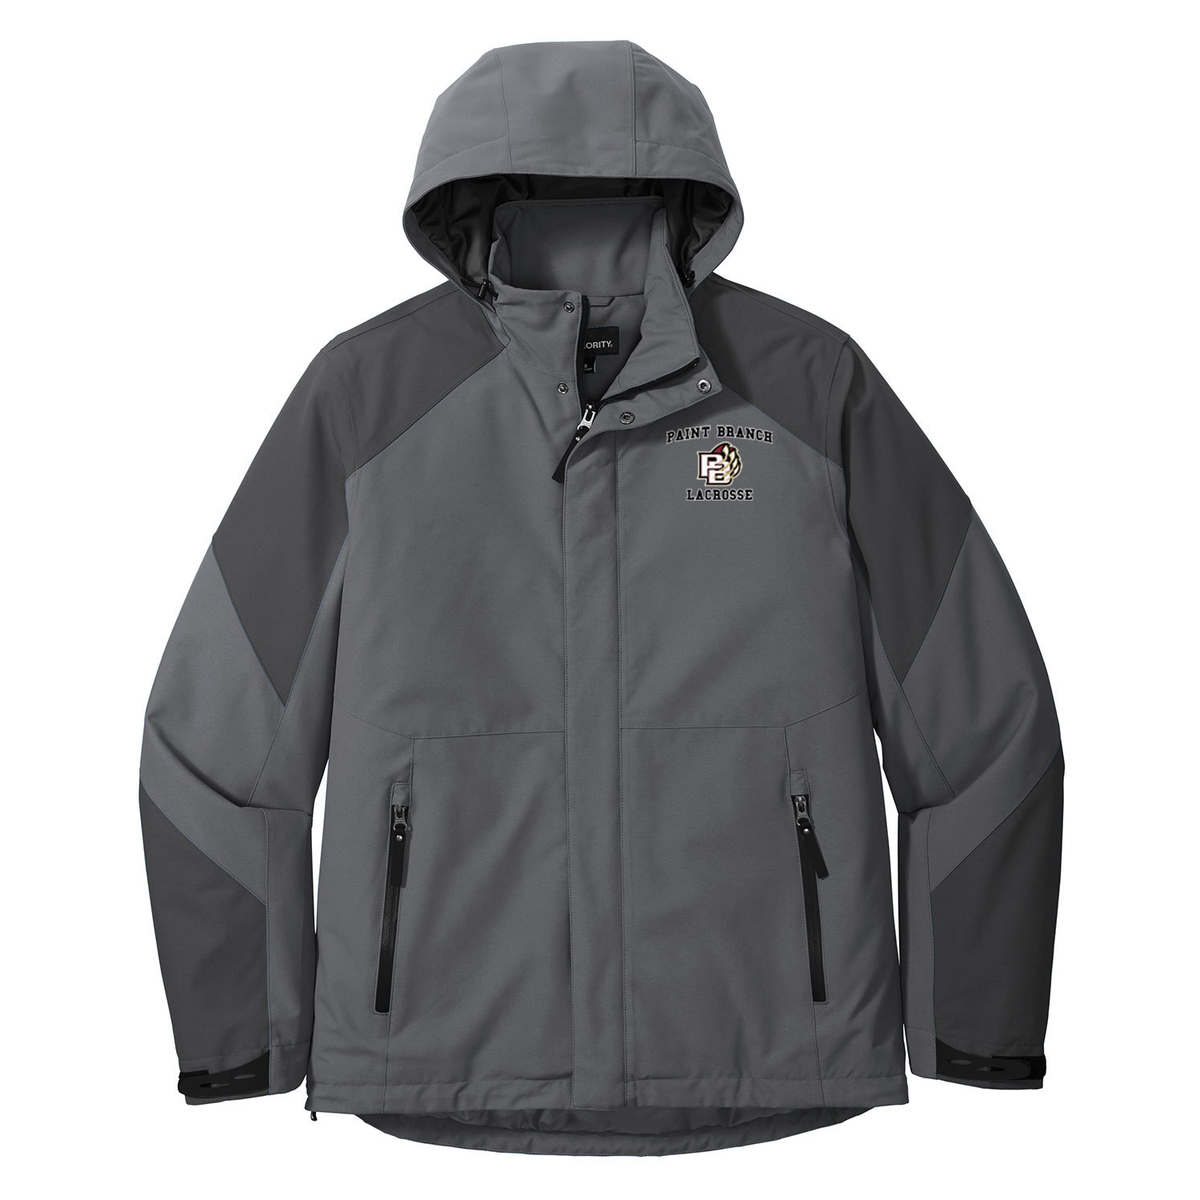 Paint Branch Lacrosse Insulated Tech Jacket